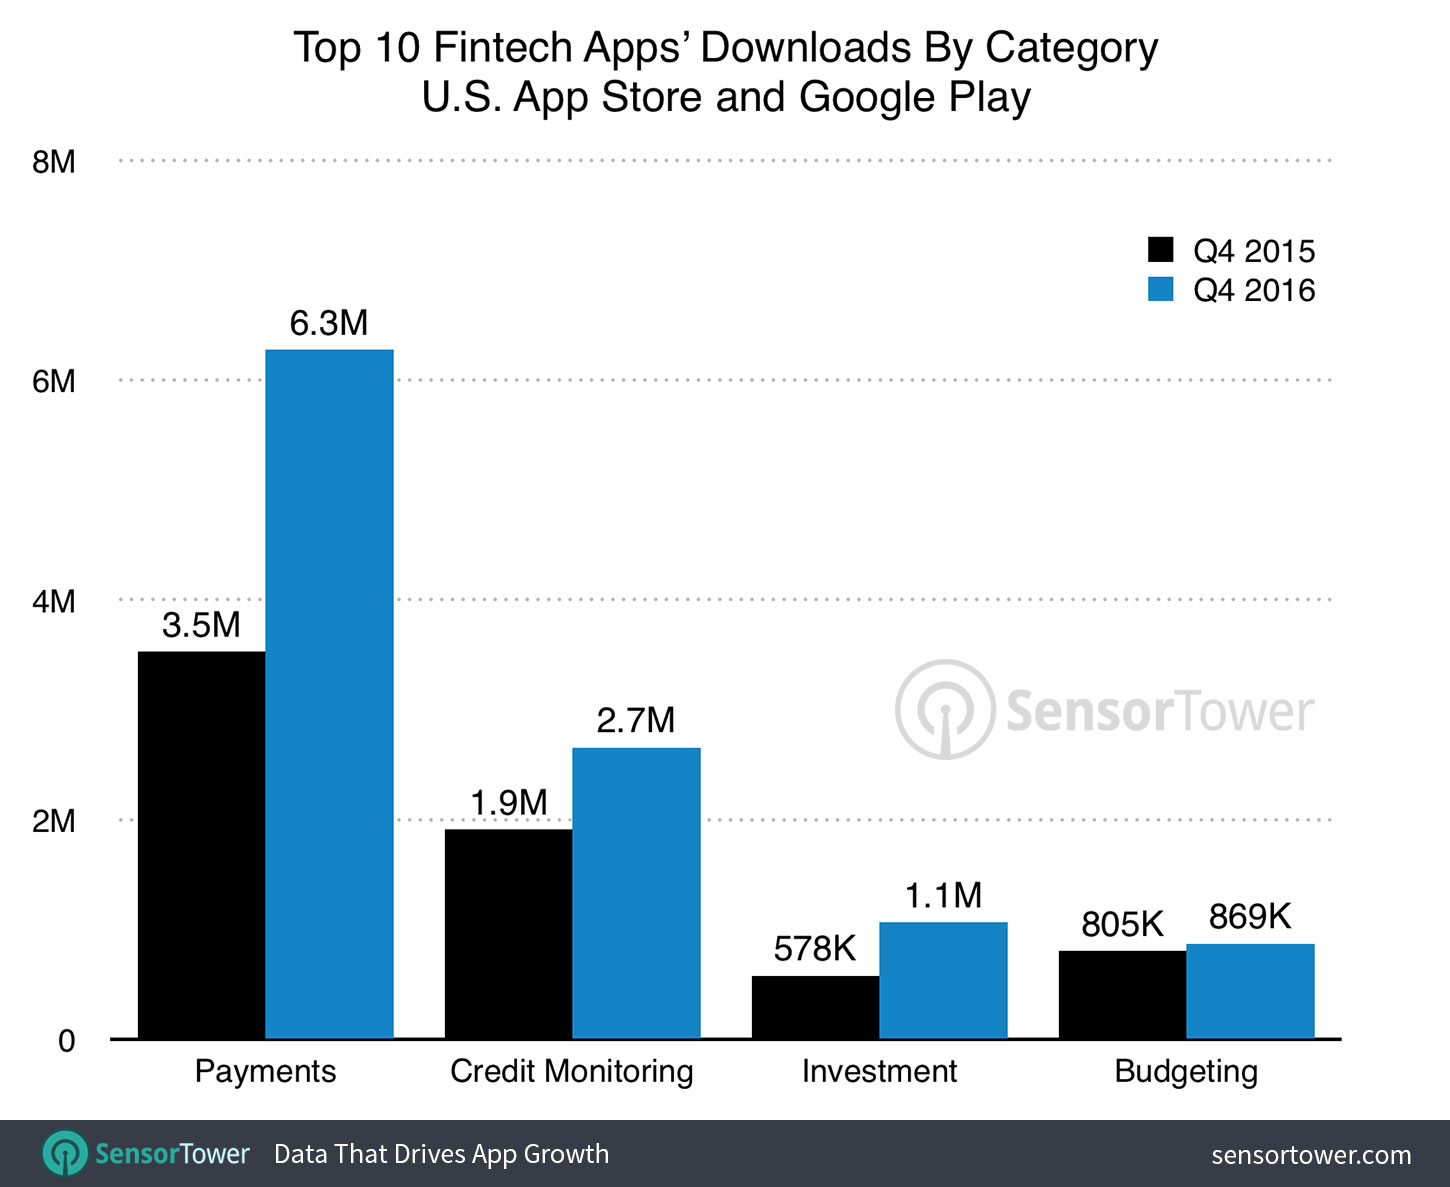 Top U.S. fintech app categories by year-over-year Q4 2016 downloads